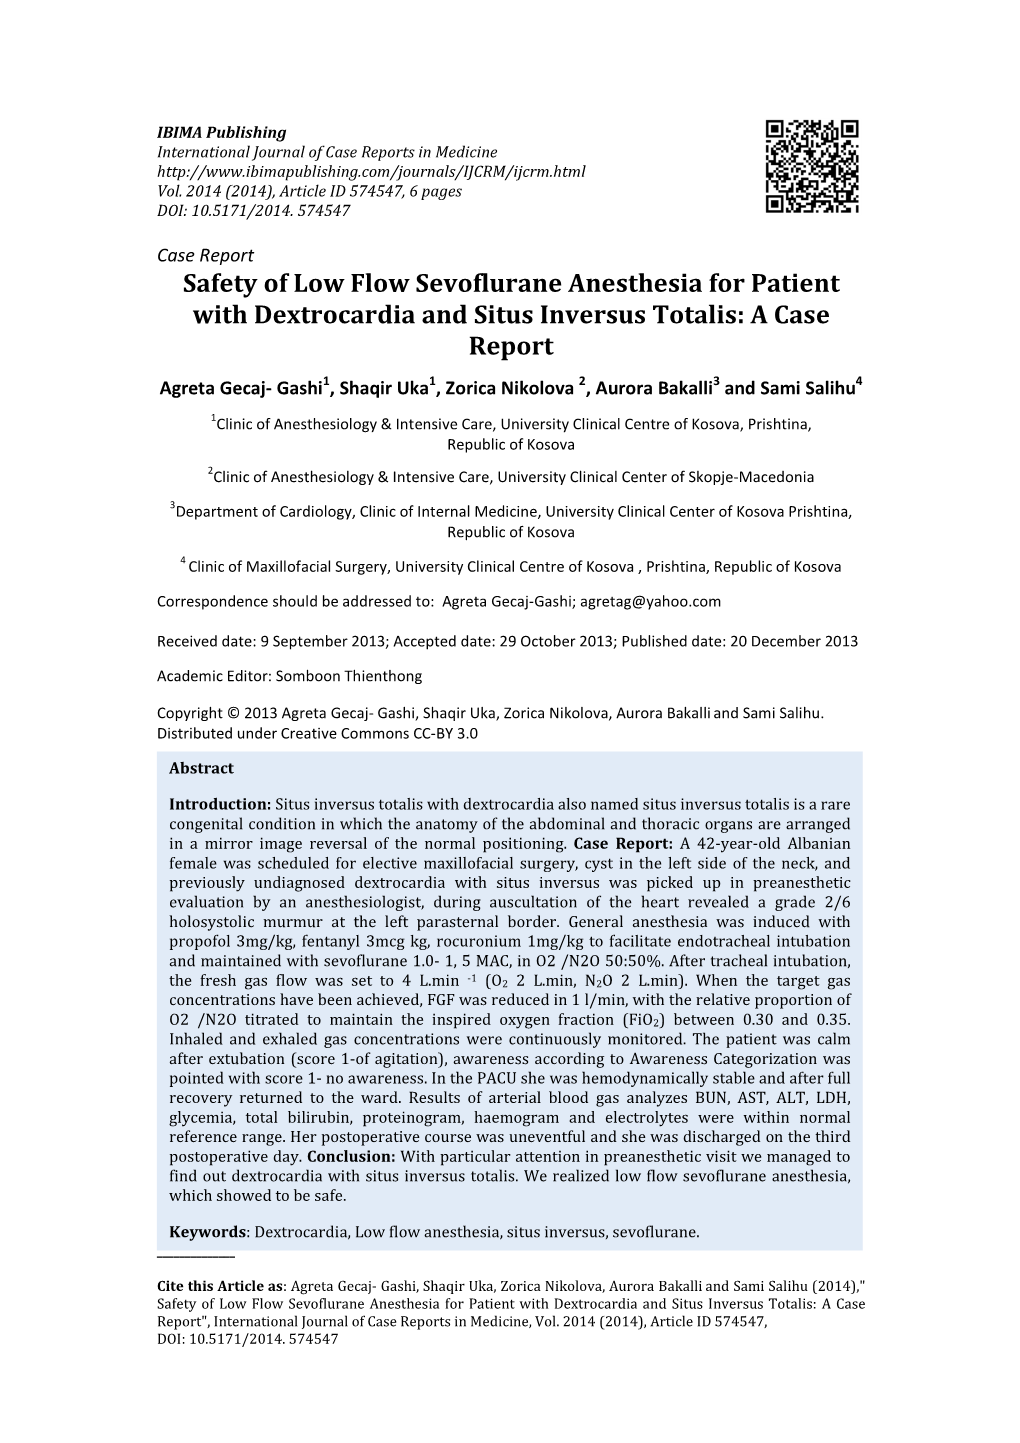 Safety of Low Flow Sevoflurane Anesthesia for Patient with Dextrocardia and Situs Inversus Totalis: a Case Report